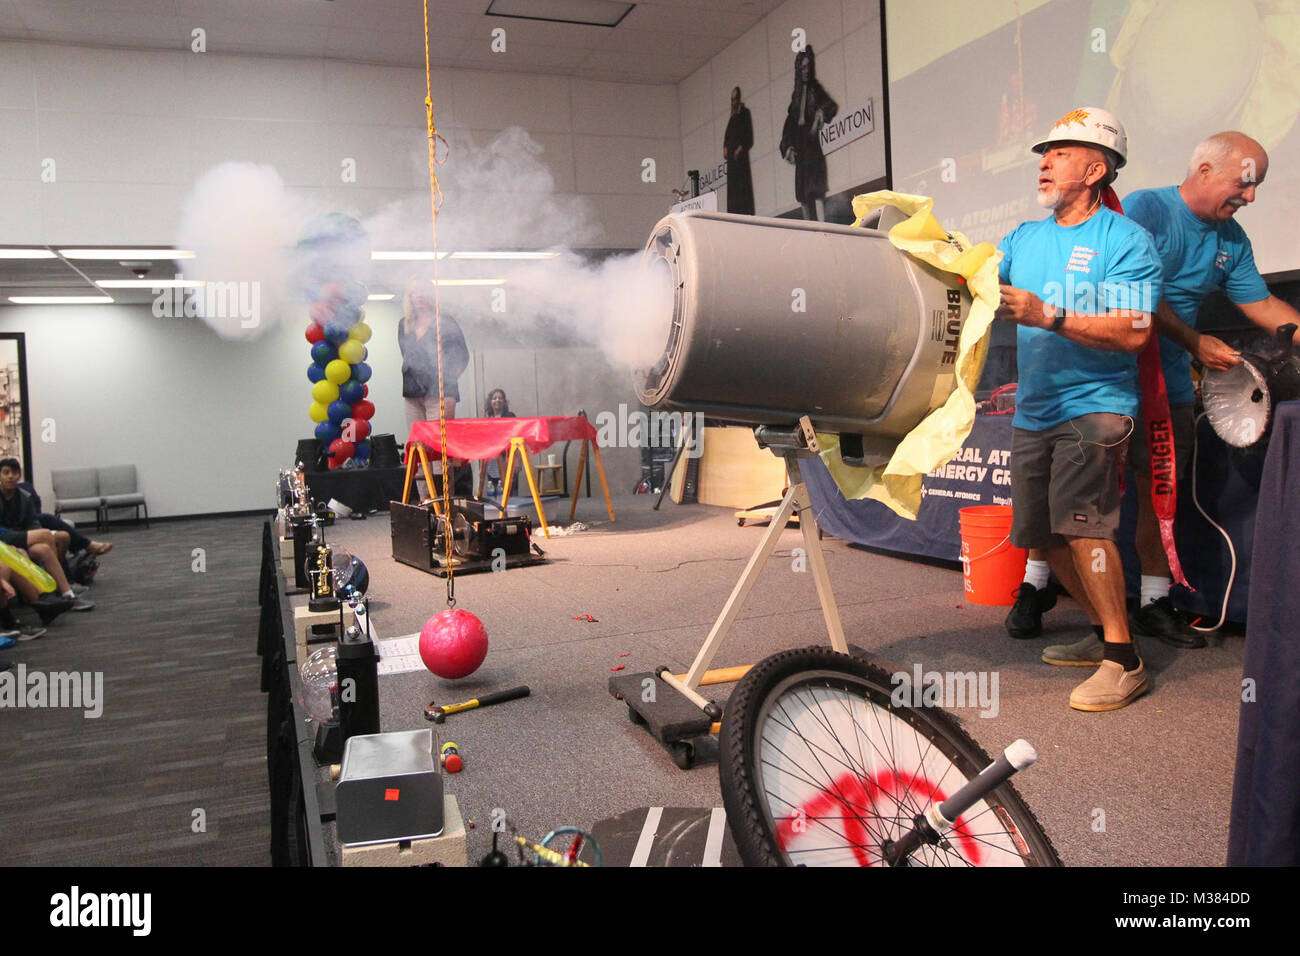 171004-N-HW977-193 RIVERSIDE, Calif. (Oct. 4, 2017) Rigo Brambila, a General Atomics Group (GA) technician, left, and Rick Lee, a GA scientist, launch smoke rings at the audience during the 18th annual Science Technology Education Partnership (STEP) Conference. Attended by thousands of elementary and middle school students from throughout Southern California's Inland Empire, NSWC Corona's participation supports the Navy's strategy to inspire, engage and educate the next generation of scientists and engineers. (U.S. Navy photo by Greg Vojtko/Released) 171004-N-HW977-193 by NAVSEA Corona Stock Photo